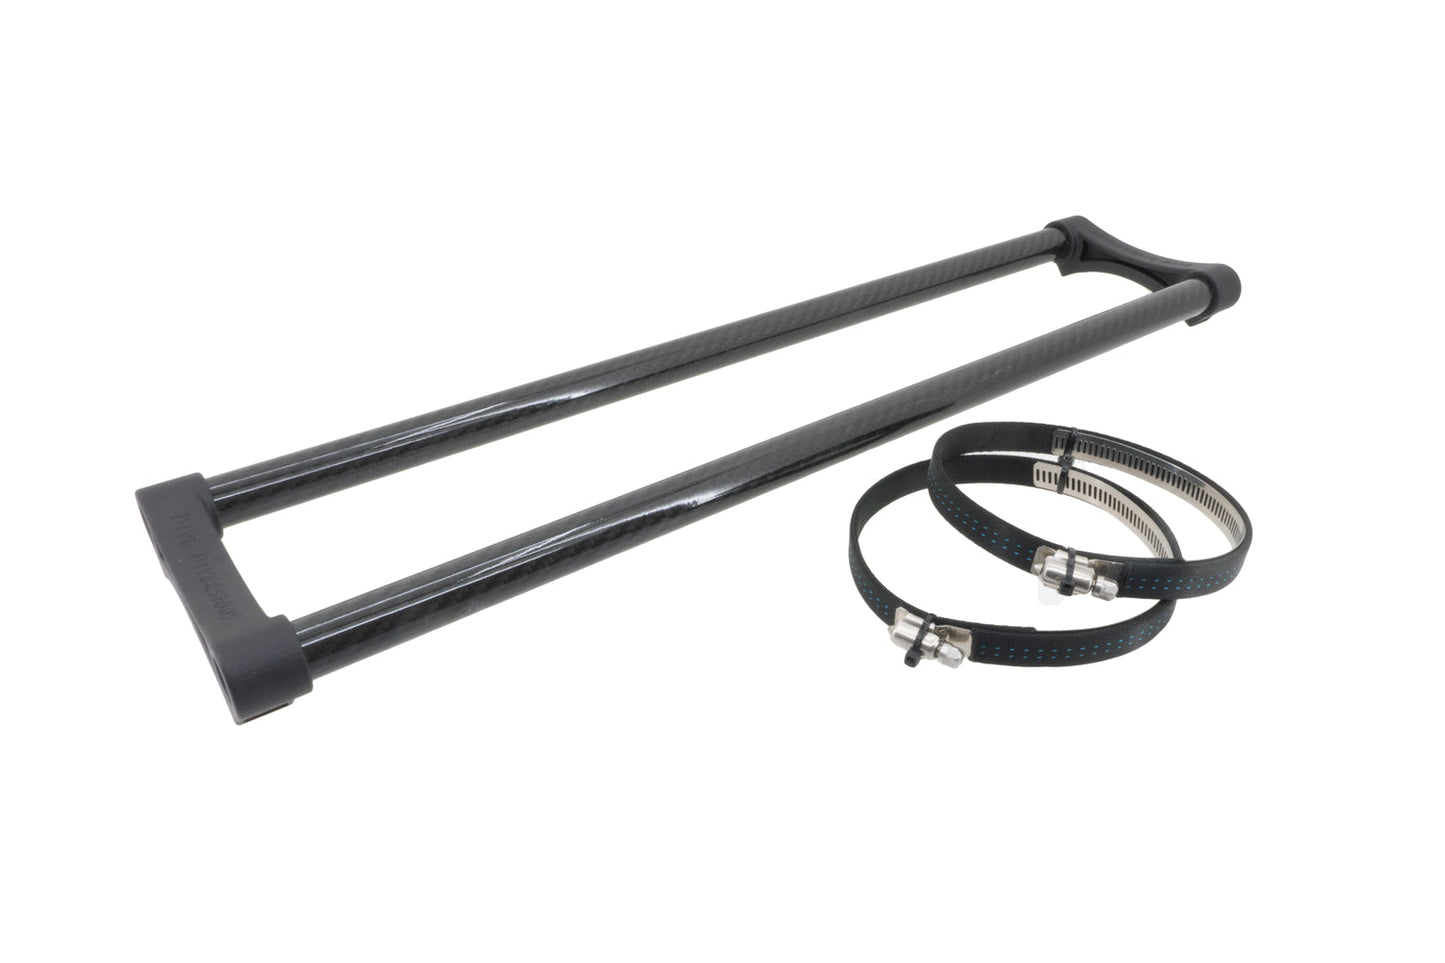 Blacktip rail mount system, image shows the 500mm rail for the Blacktip Explorer Scooter with the mounting bands.